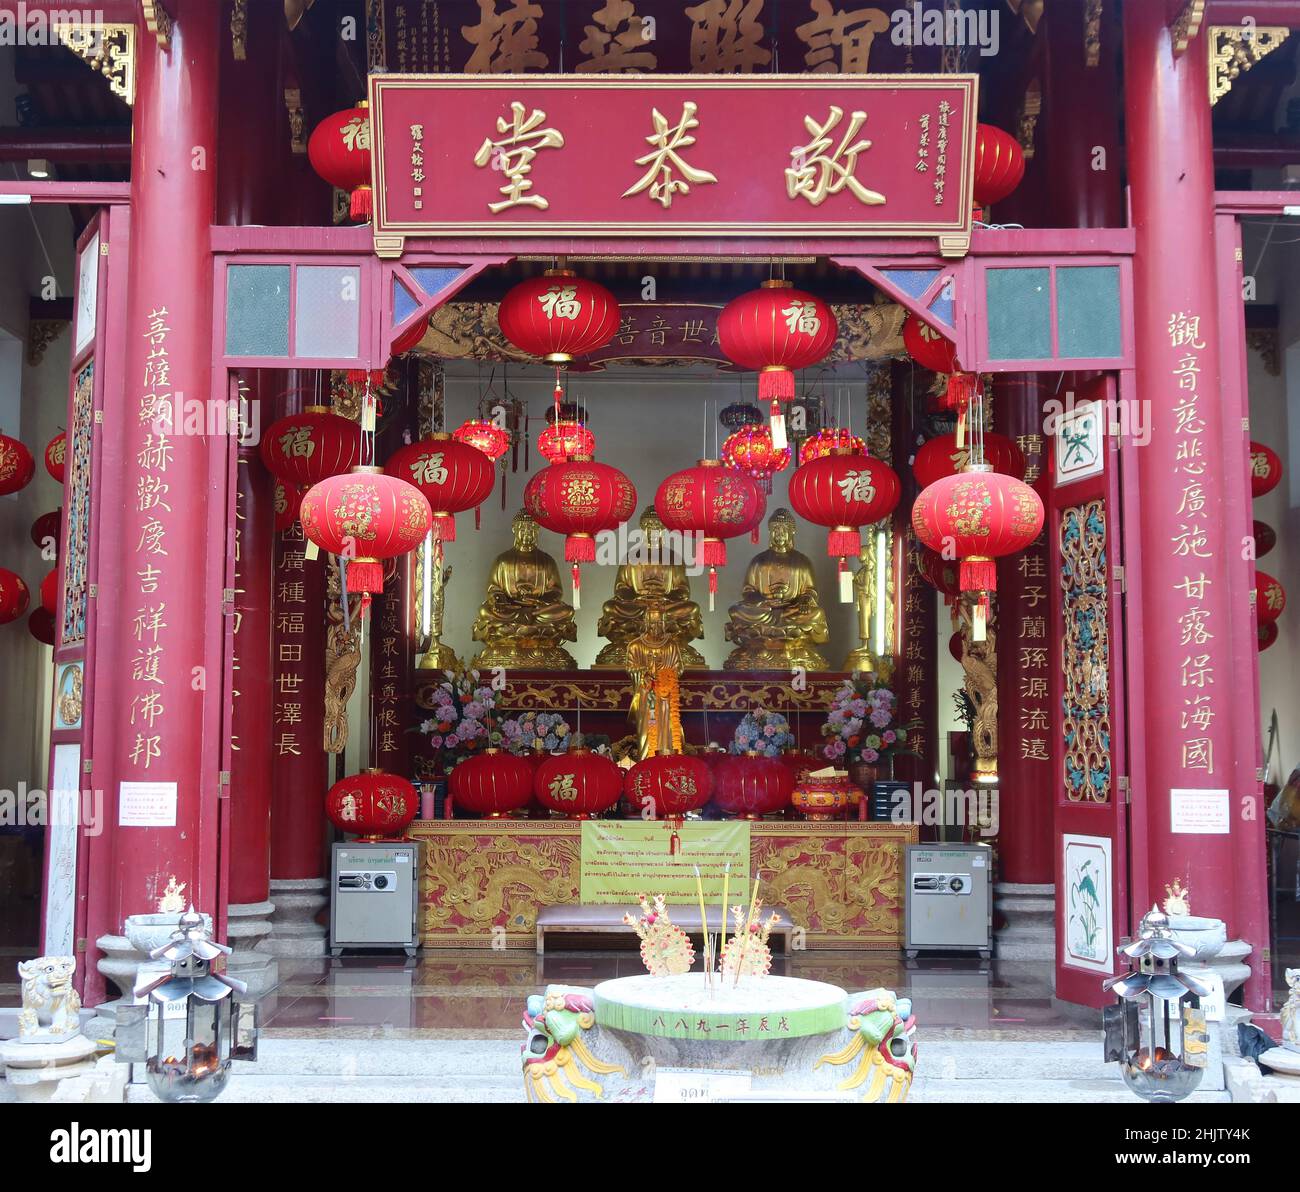 Kwang Tung Shrine with authentic Chinese sculptures of Lord Buddha, Chinatown, Bangkok, Thailand Stock Photo